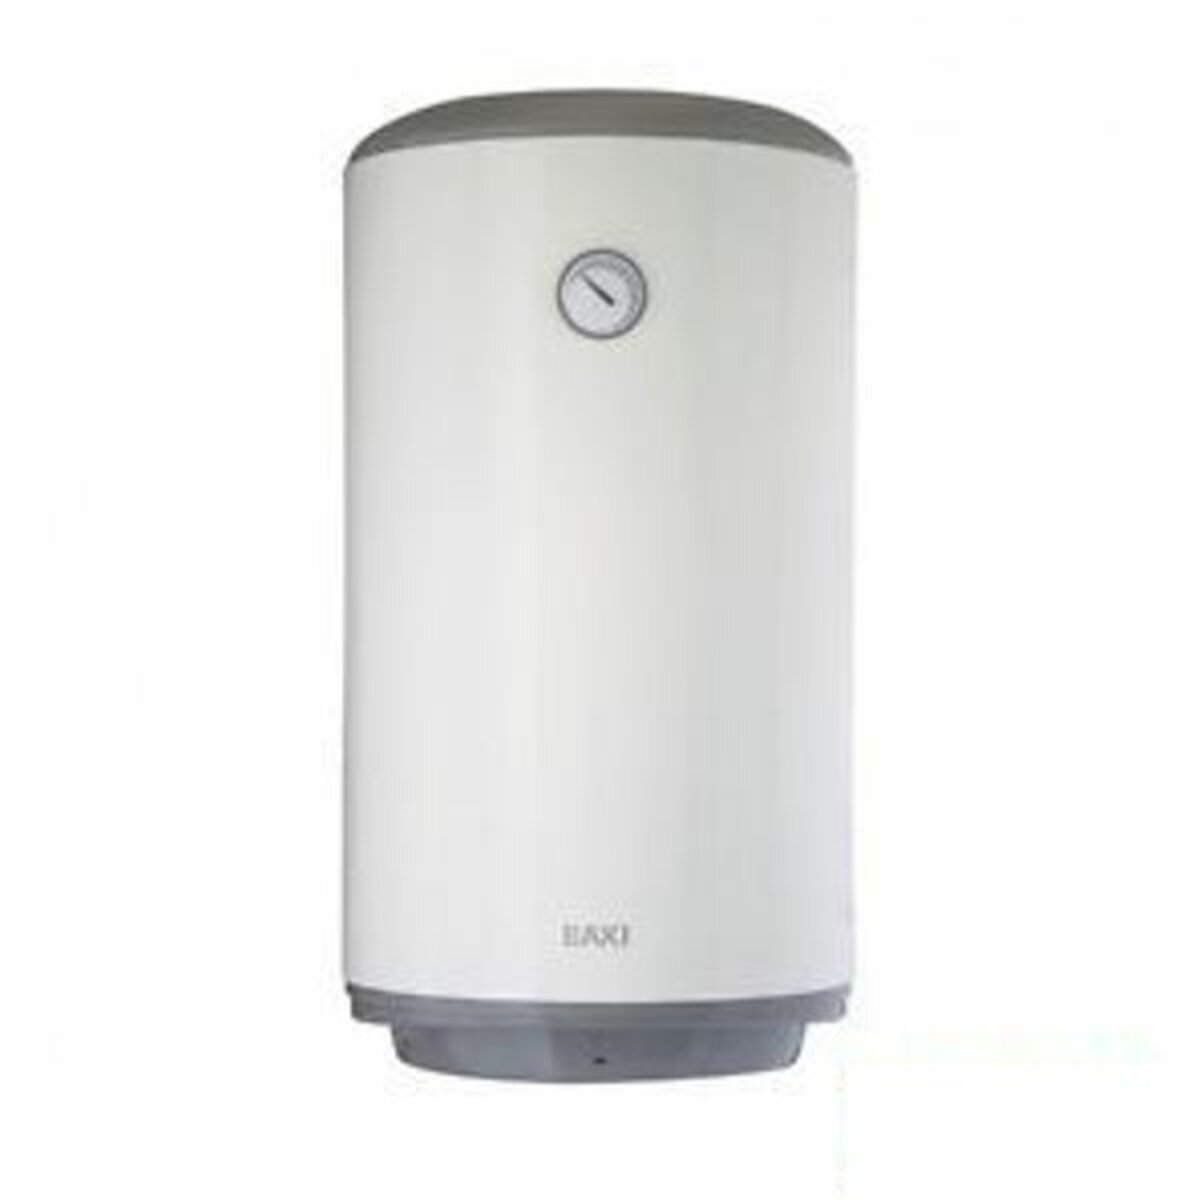 Electric water heater ExtrA + Baxi v230 line 30 liters 2 years